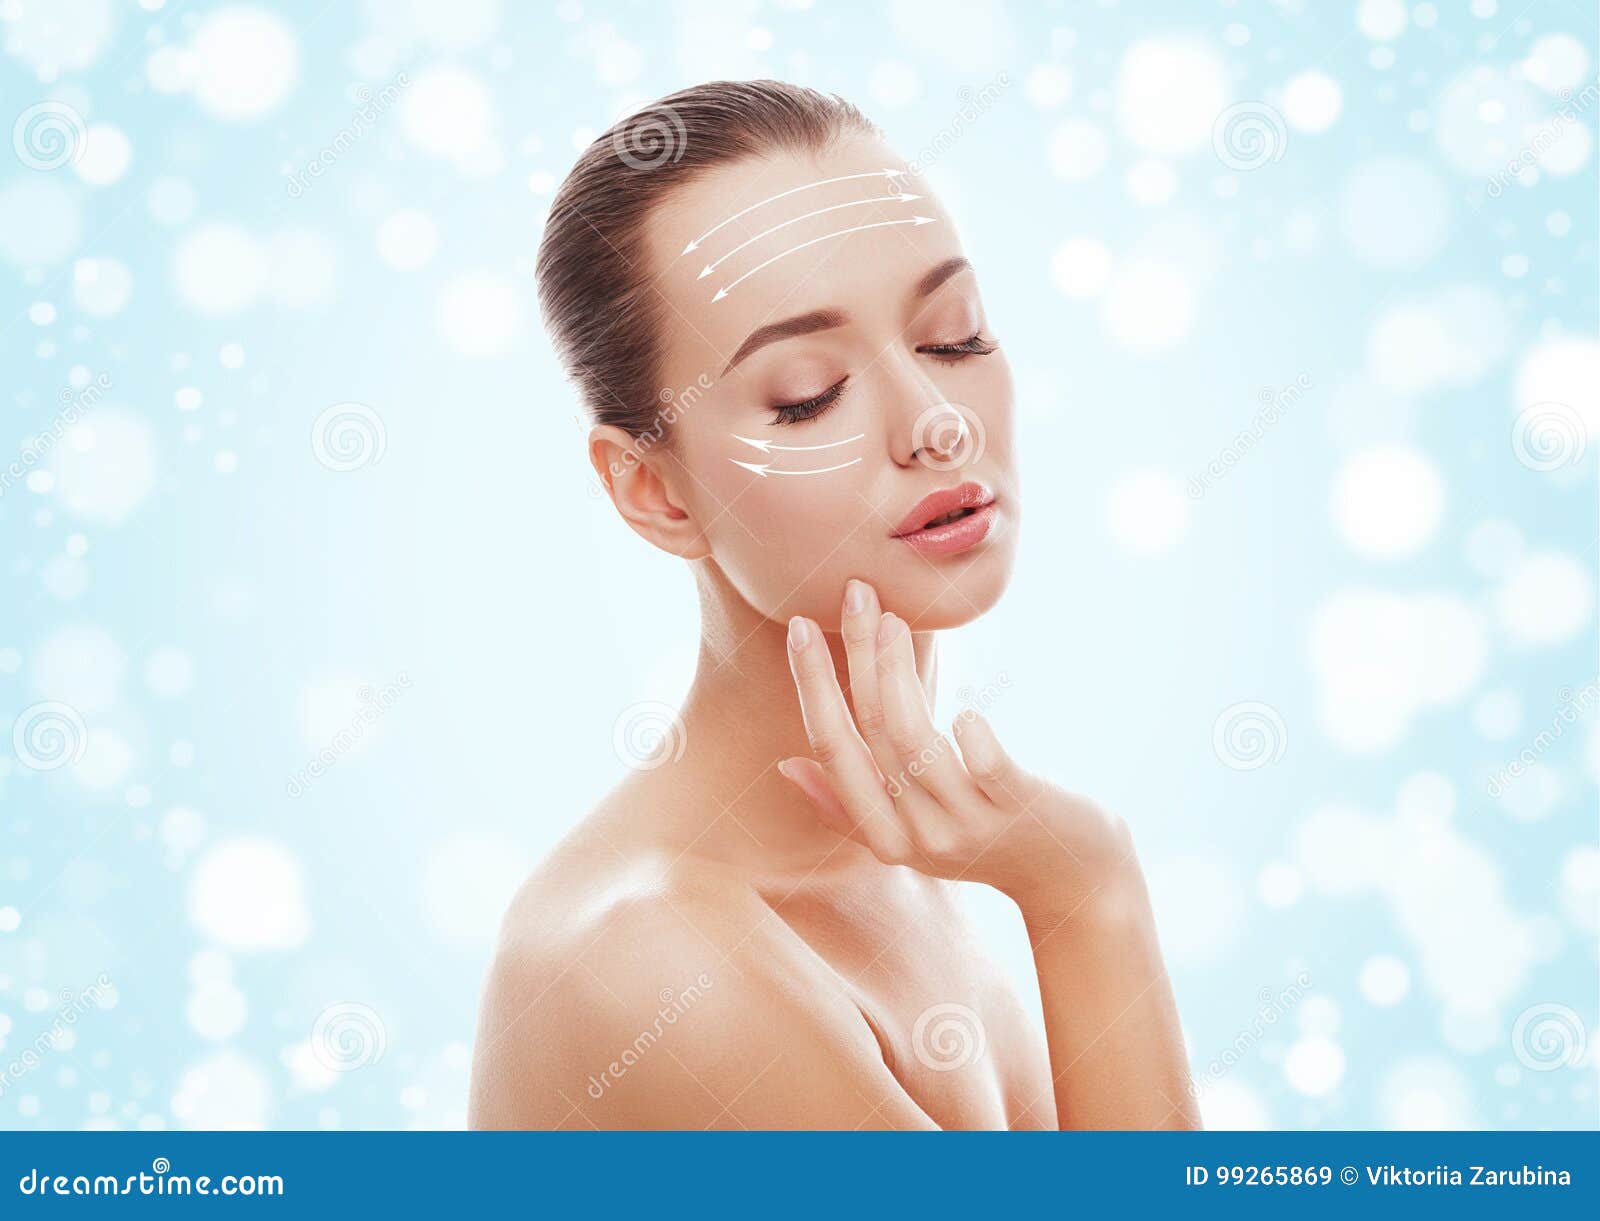 beautiful young girl touching her face on blue background and snow. plastic surgery, facelift and rejuvenation concept.